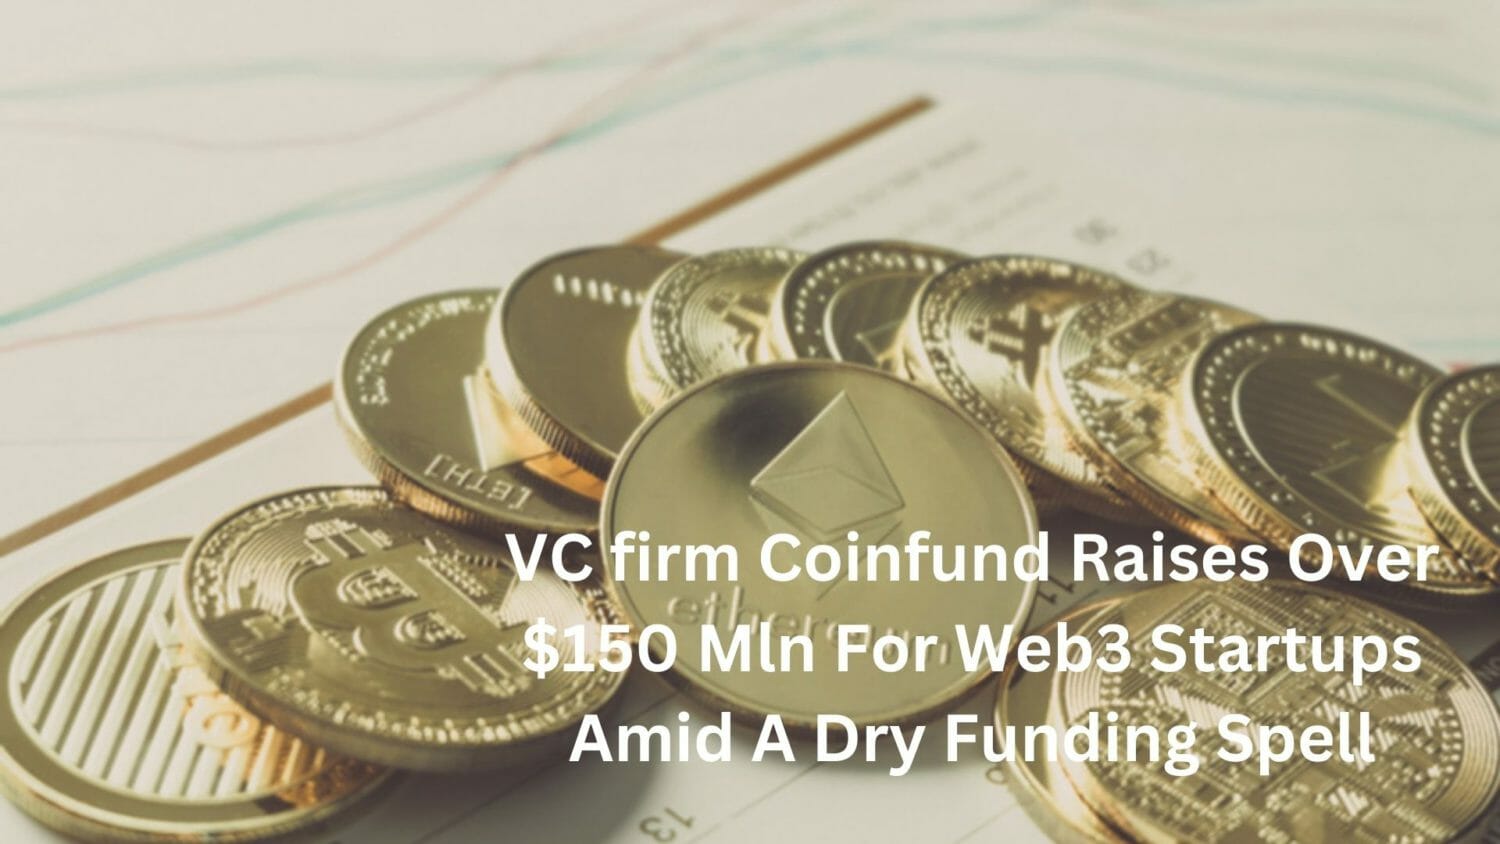 Vc Firm Coinfund Raises Over $150 Mln For Web3 Startups Amid A Dry Funding Spell